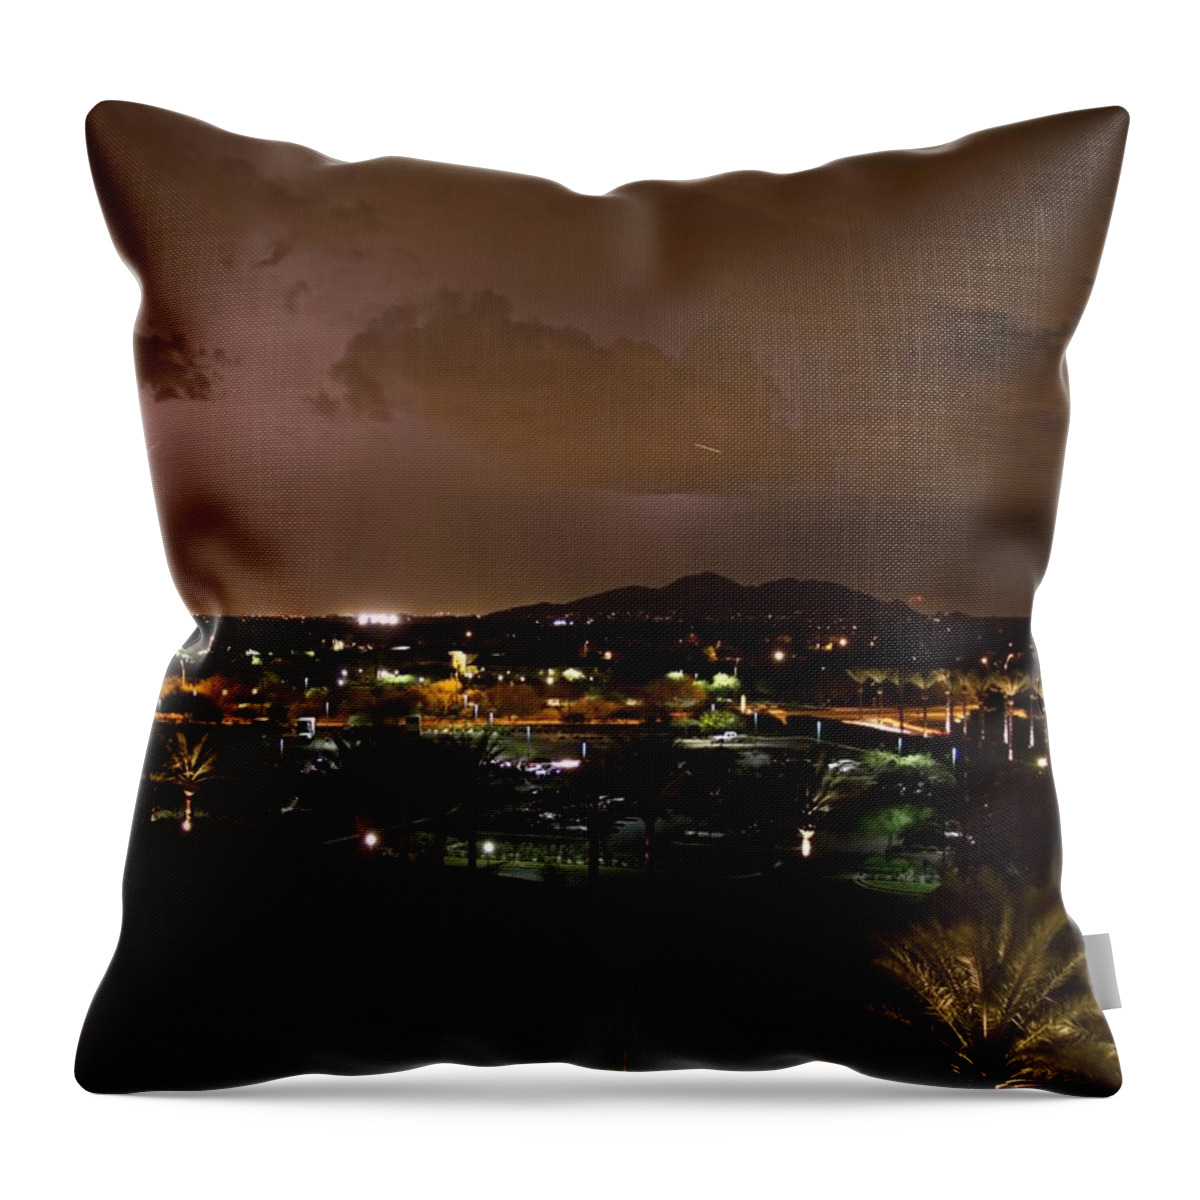 Thunderstorm Throw Pillow featuring the photograph Lightning Strike by Zeesstof